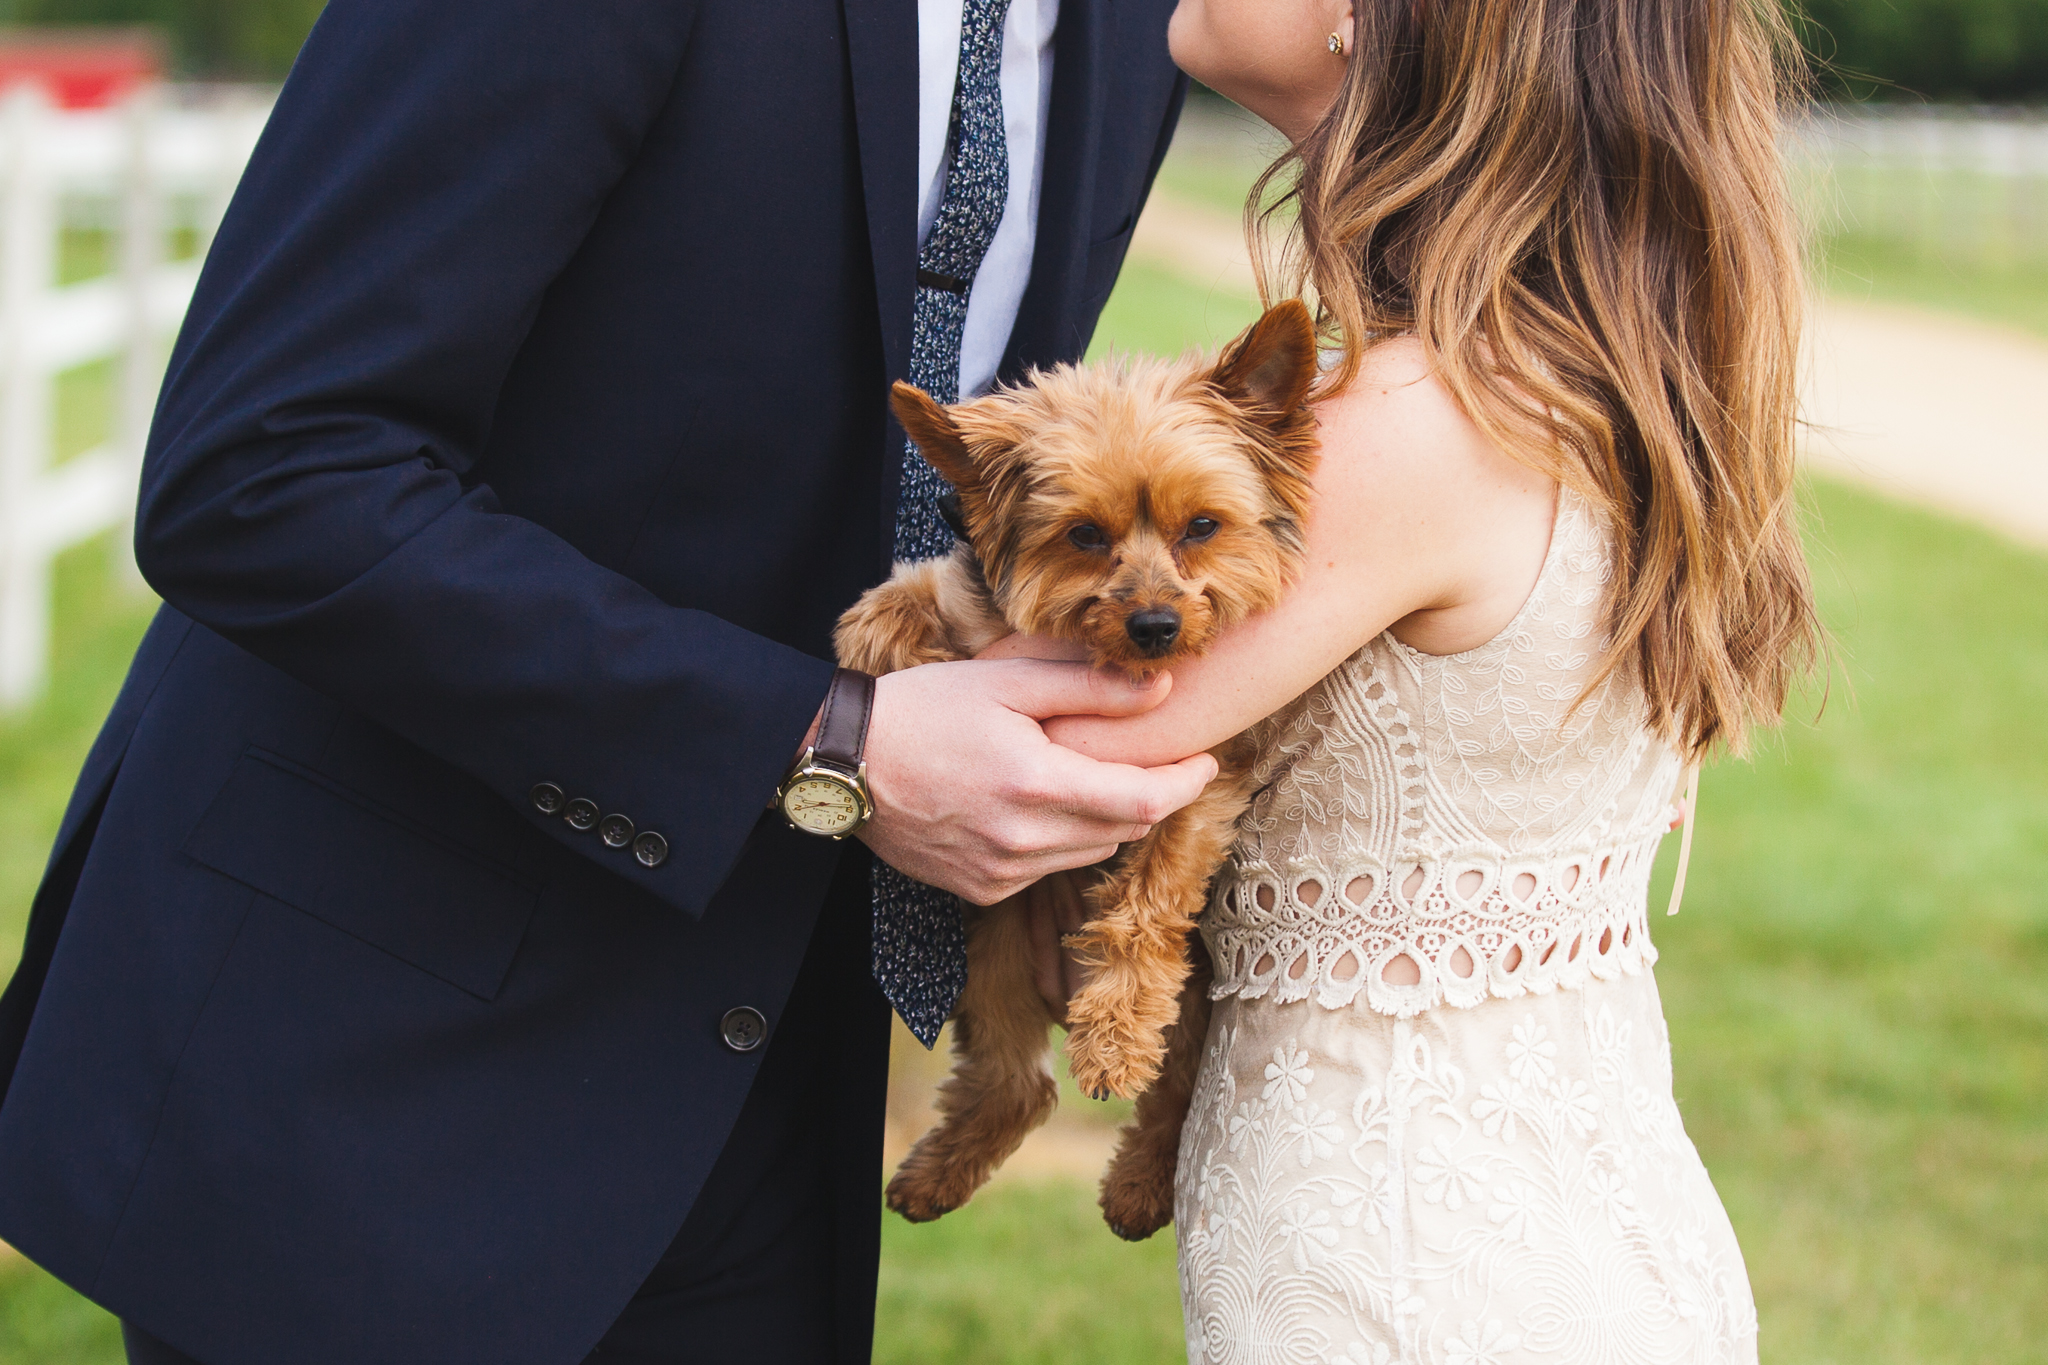  Family Farm Wedding in South Jersey Photography - Rustic Barn NJ - Millville, Vineland, Pittsgrove, Cape May, Ocean City - Creative Photographer, Candid, Joyful, Adventure. Elopement, Casual - Yorkie Puppy Ring Bearer Dog 